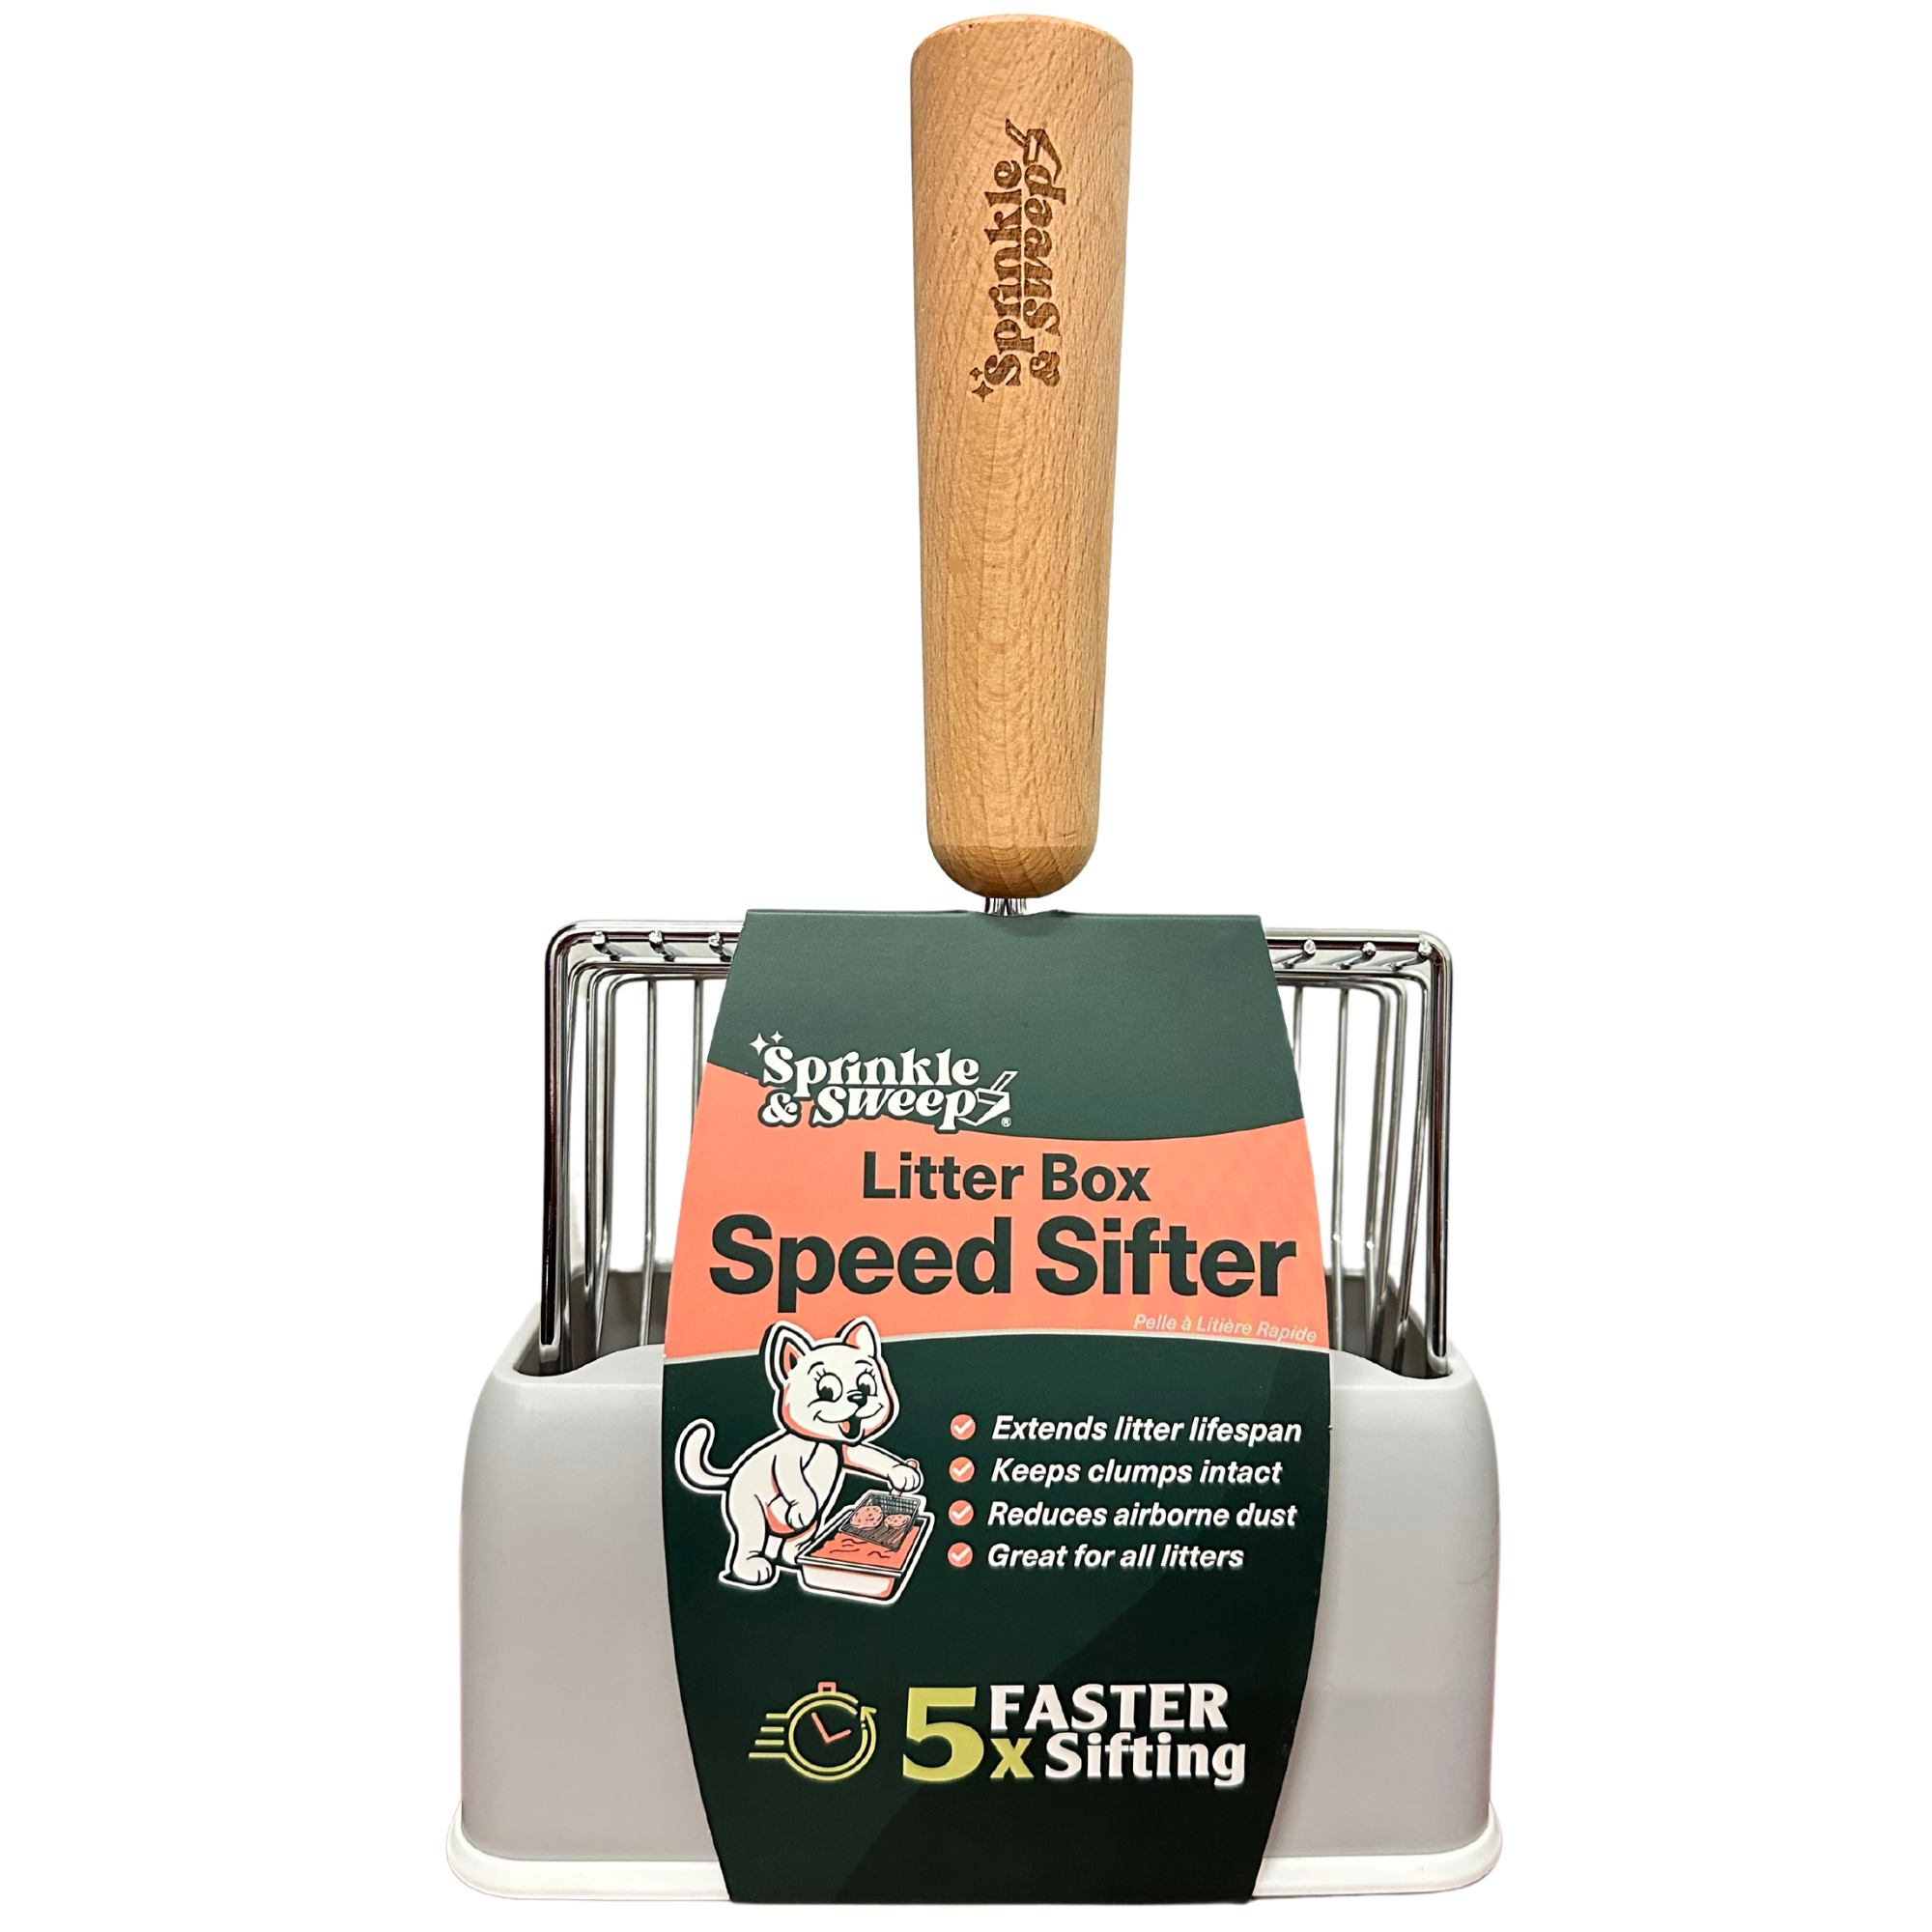 Sprinkle & Sweep Litter Box Speed Sifter